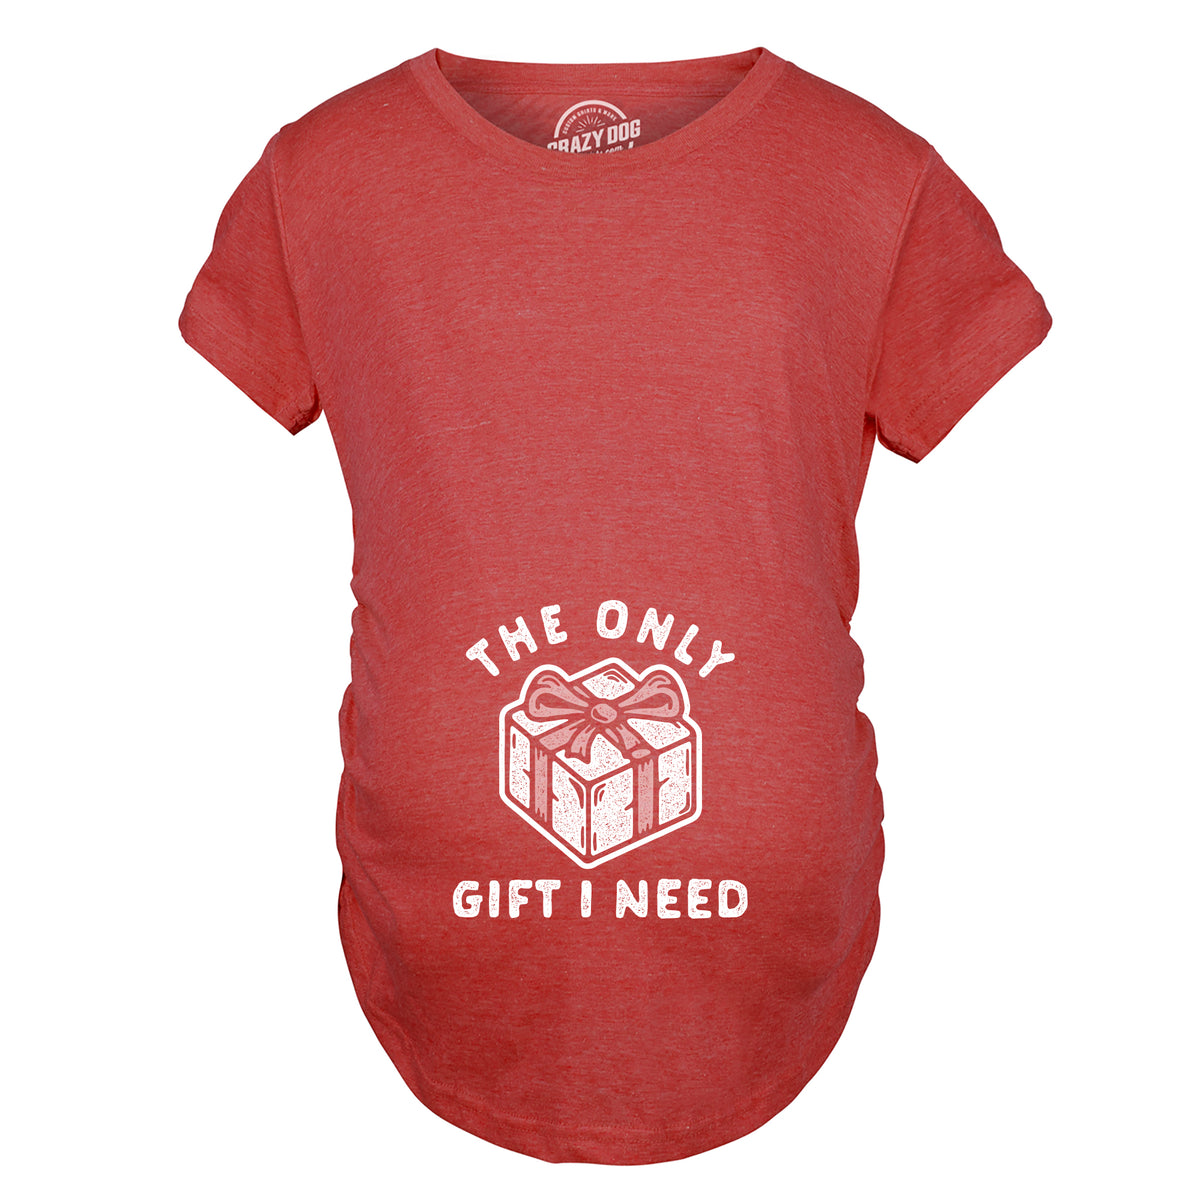 The Only Gift I Need Maternity Tshirt